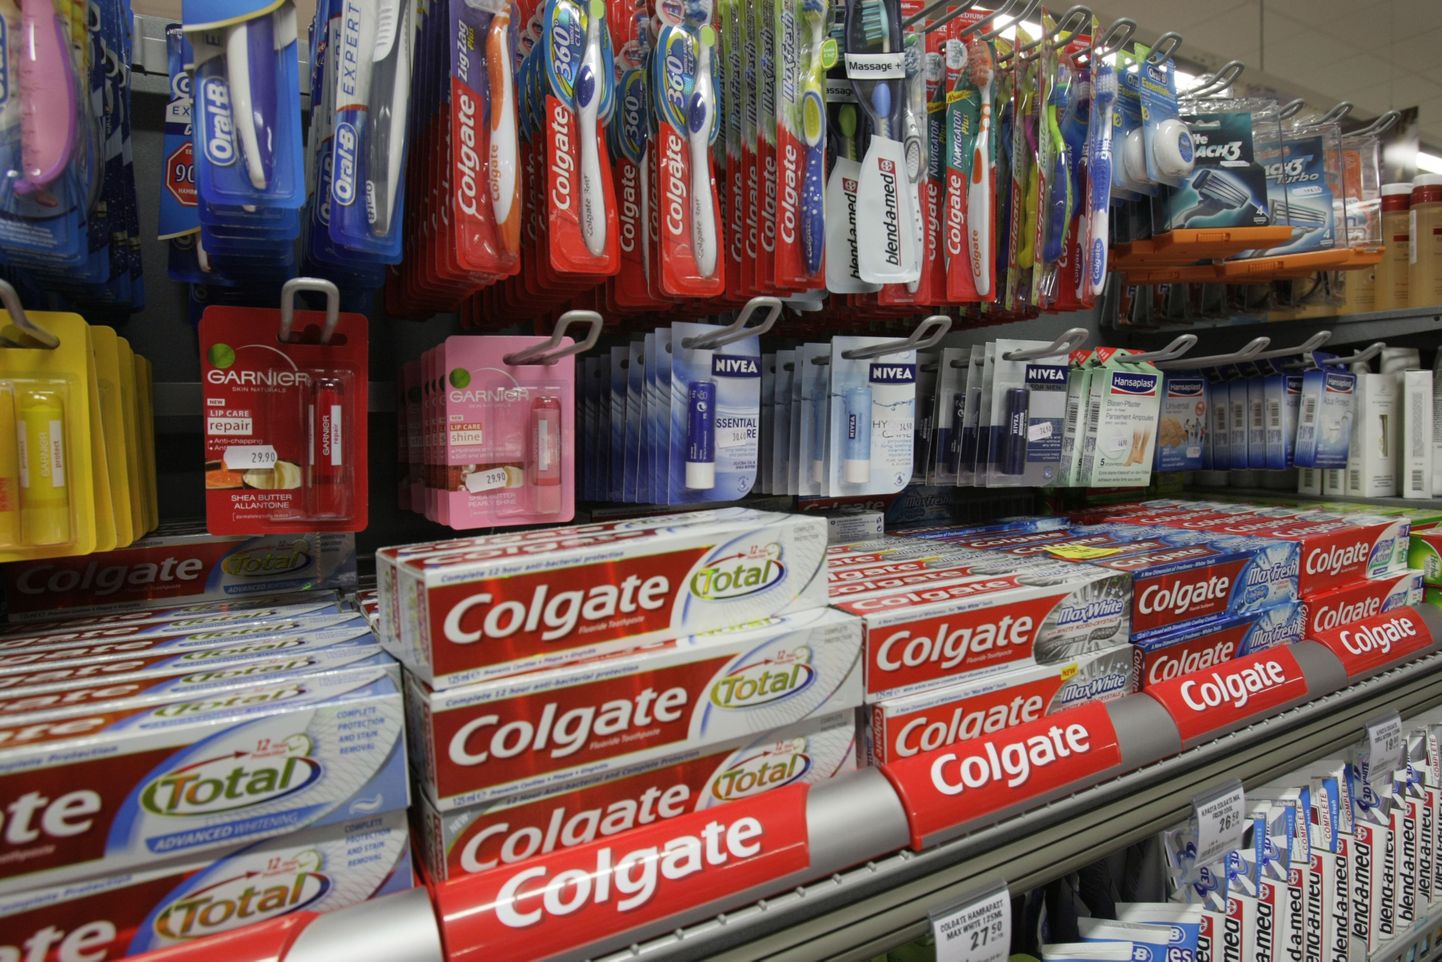 Colgate-Palmolive tooted.